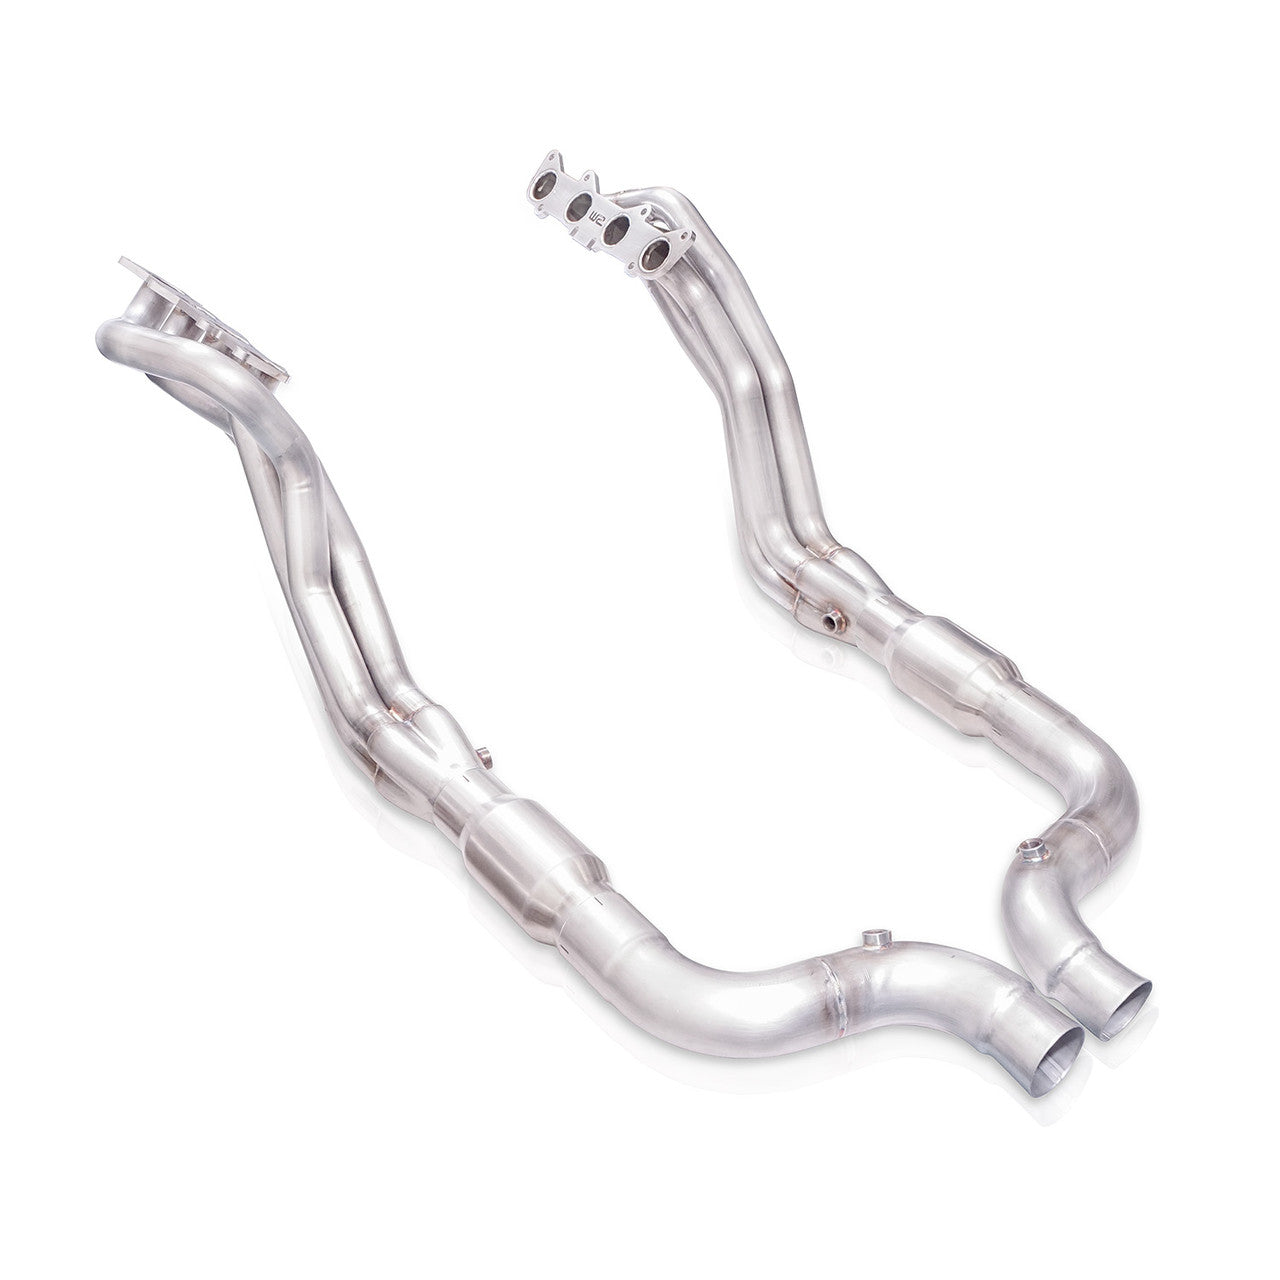 Stainless Work 1-7/8" Stainless Steel Long Tube Headers and Catted Connection Pipes for S-550 (2015-Present) Mustang GT